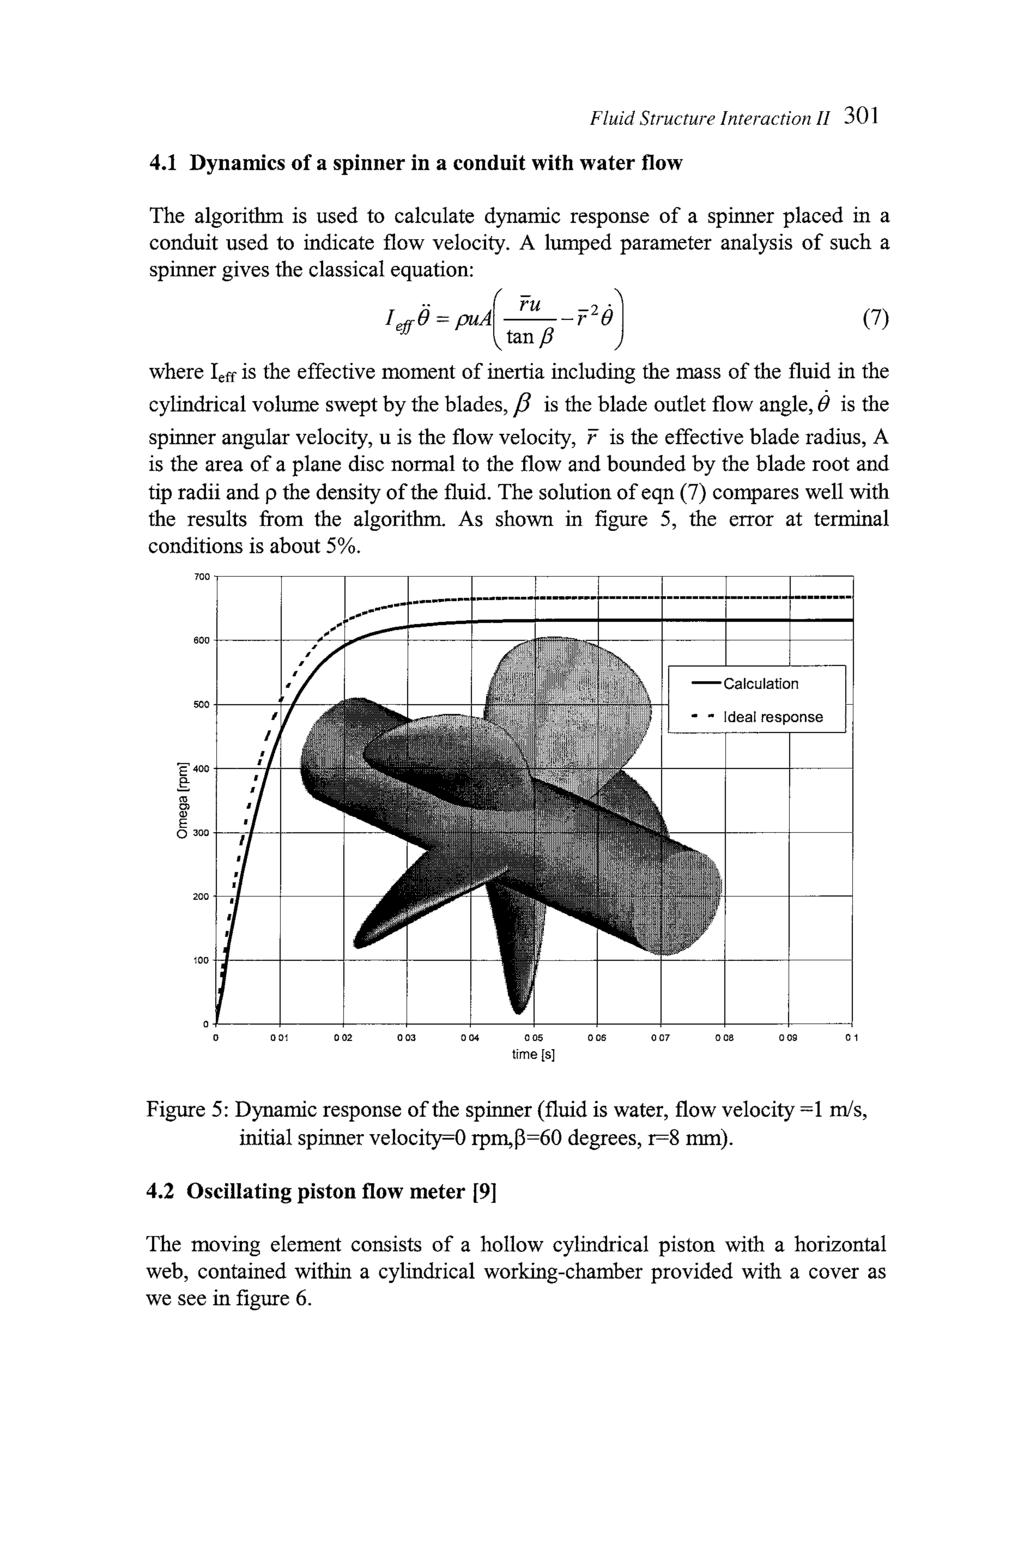 4.1 Dynamics of a spinner in a conduit with water flow Fluid Structure Interaction I1 301 The algorithm is used to calculate dynamic response of a spinner placed in a conduit used to indicate flow